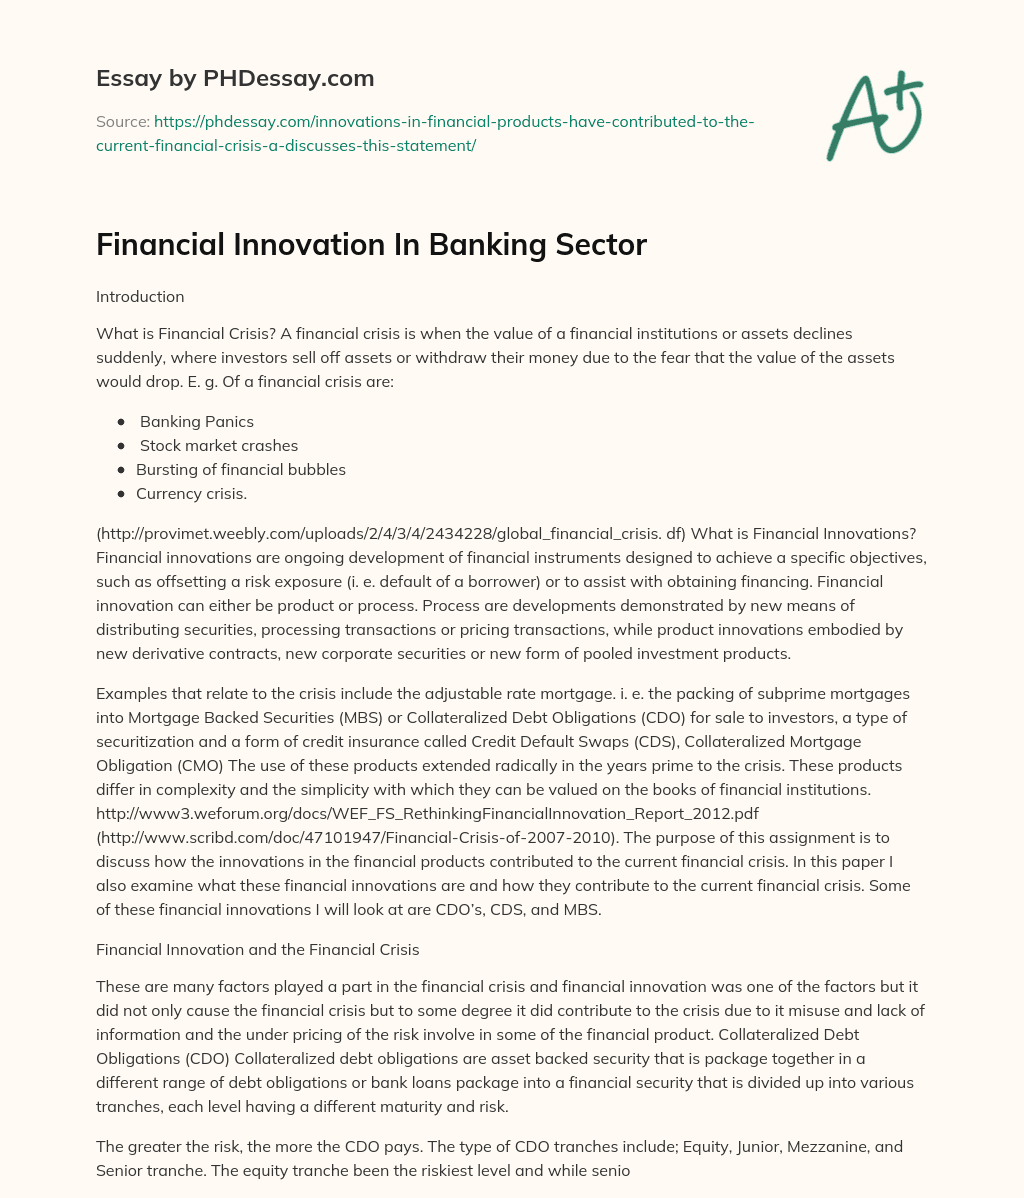 Financial Innovation In Banking Sector essay